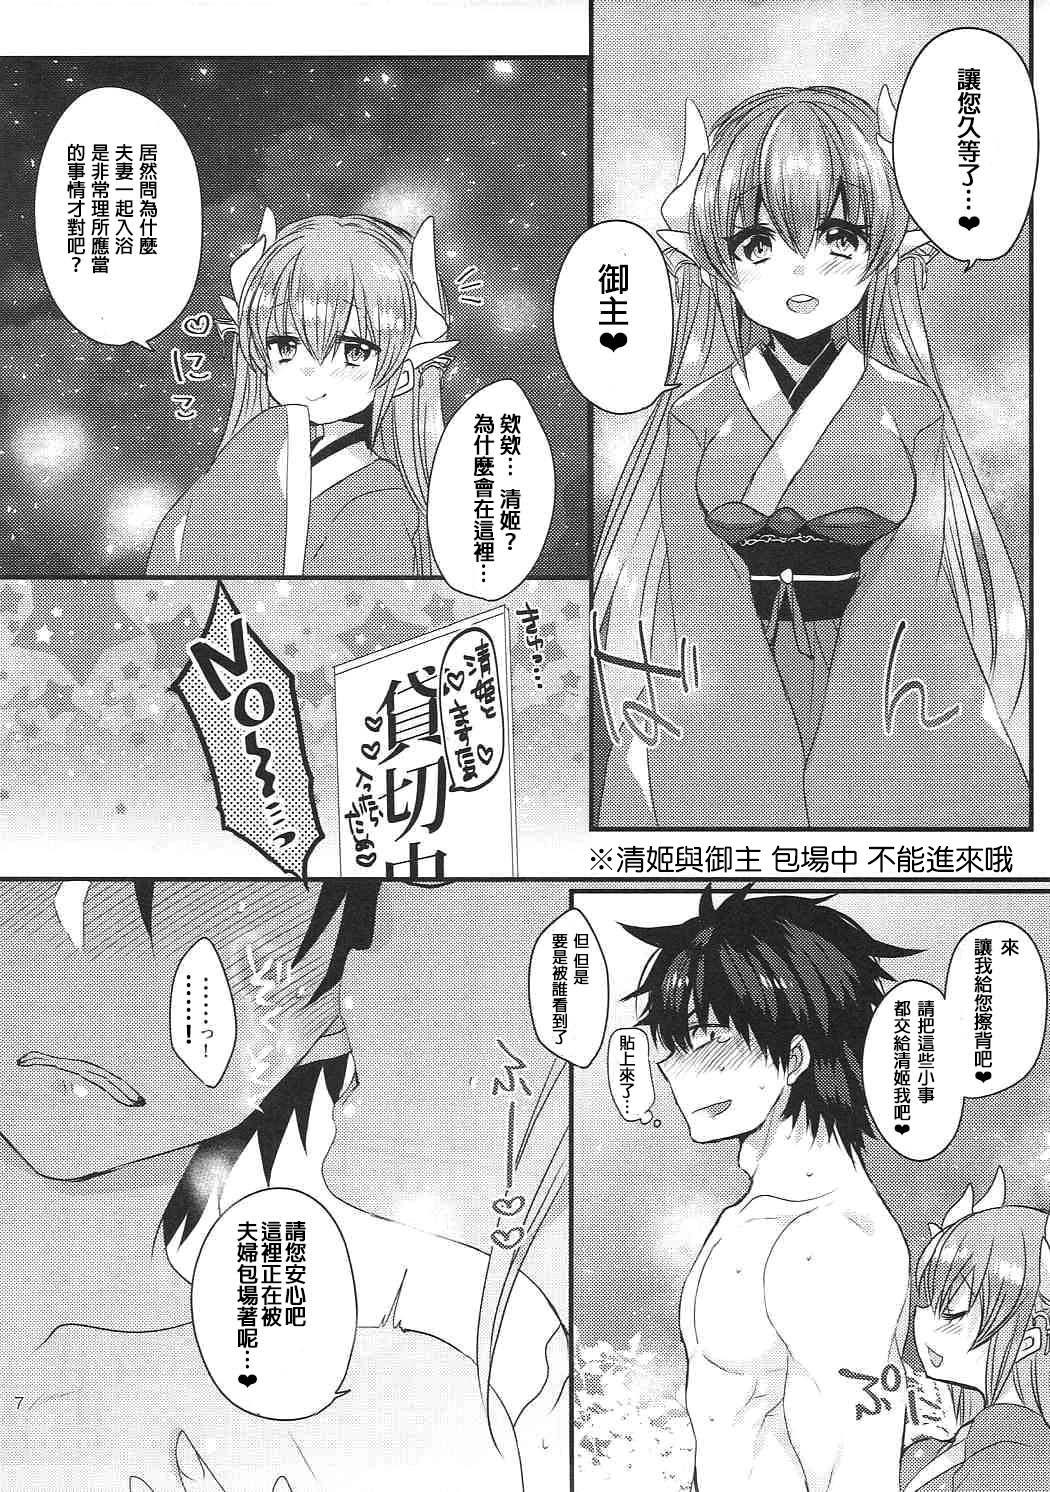 Rope Kiyohime to Love Love Ofuro Time - Fate grand order Camsex - Page 7